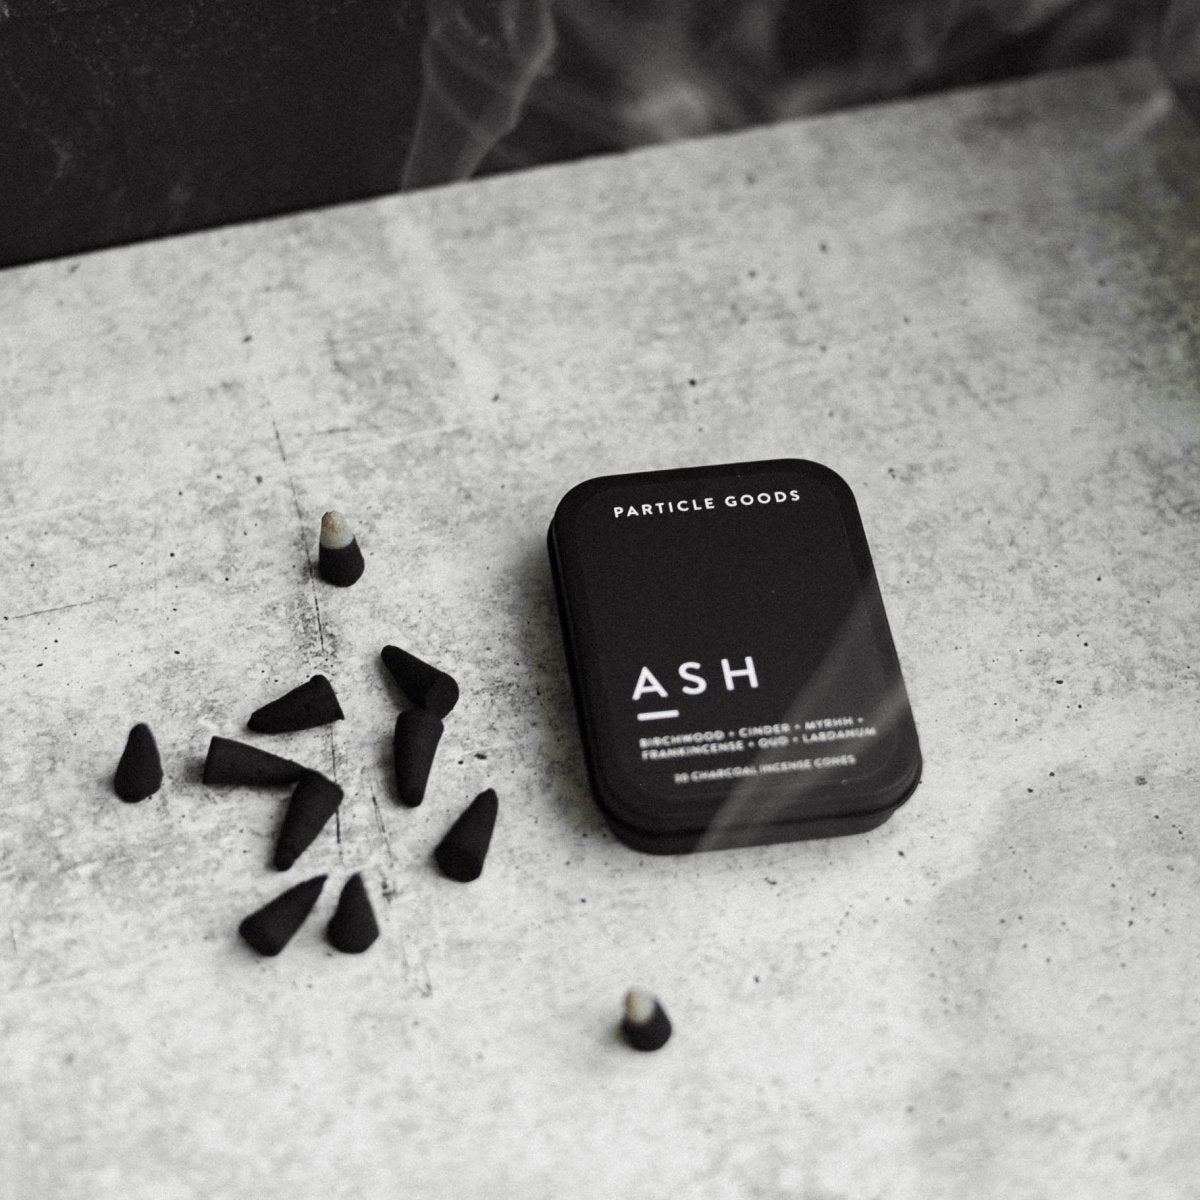 Rectangular matte black tin set next to burning  incense cones in the scent Ash. Made by Particle Goods in Seattle, WA.